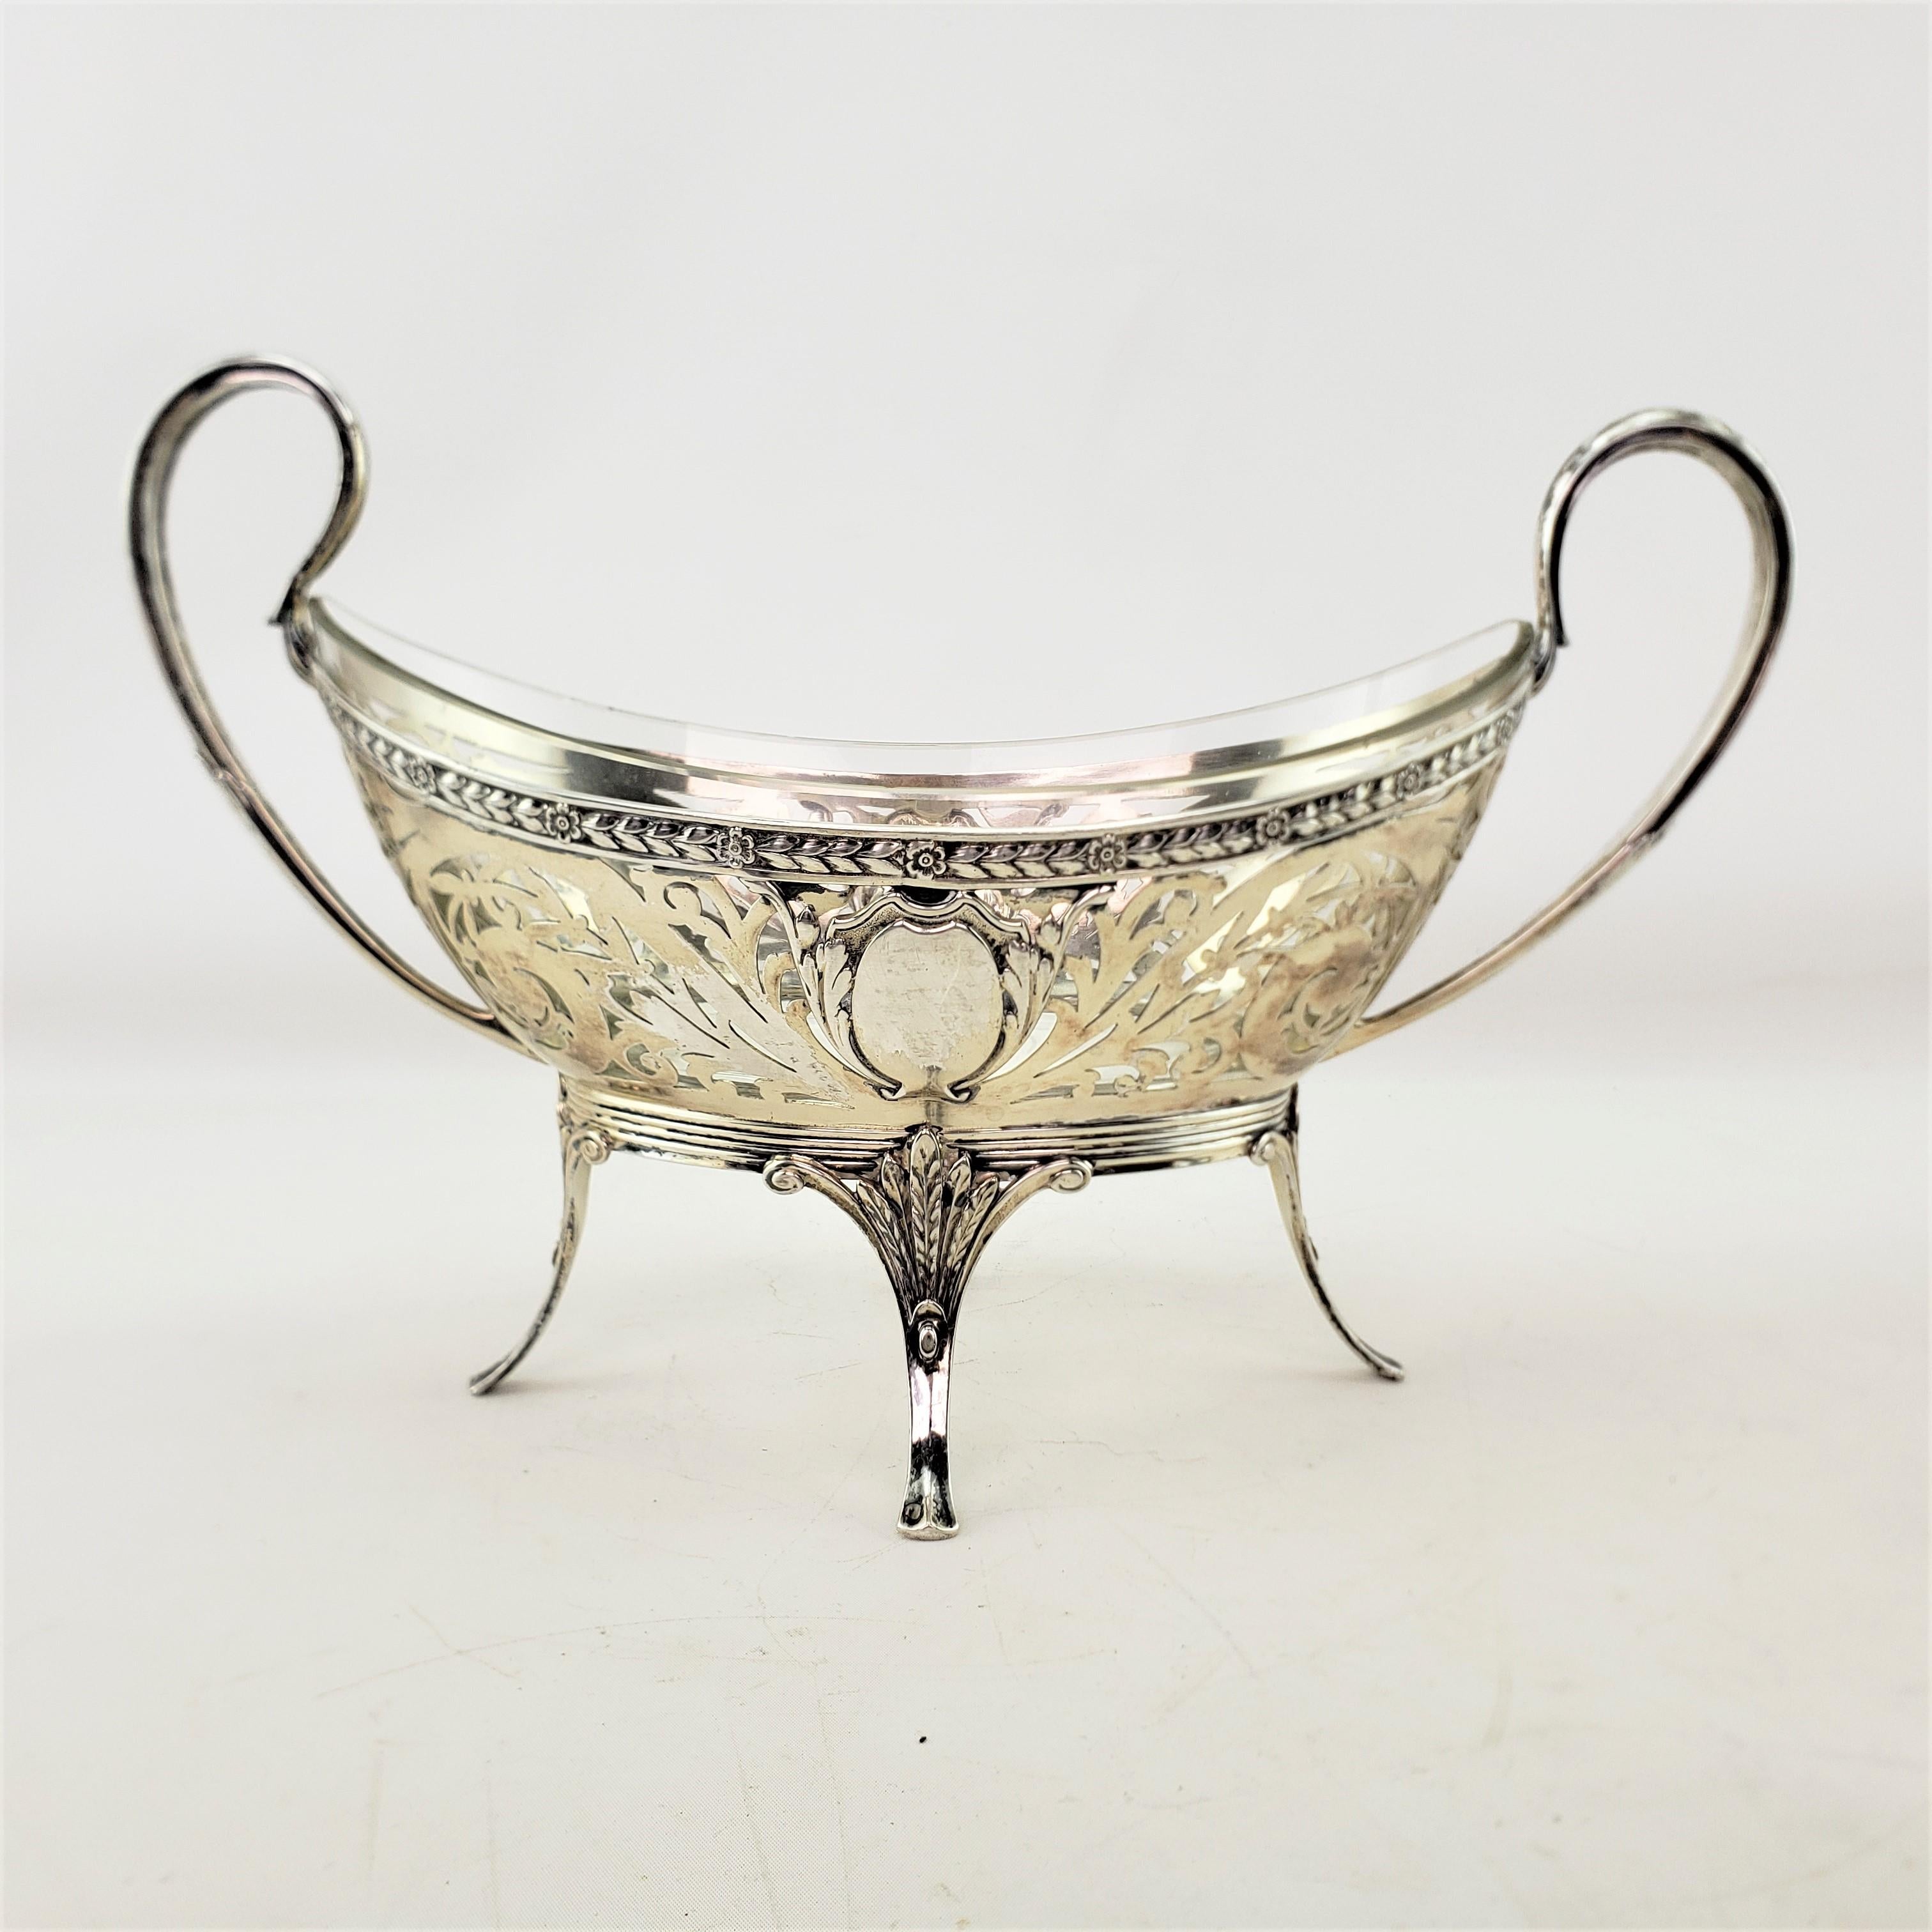 Antique German .800 Silver & Crystal Lined & Footed Basket or Centerpiece In Good Condition For Sale In Hamilton, Ontario